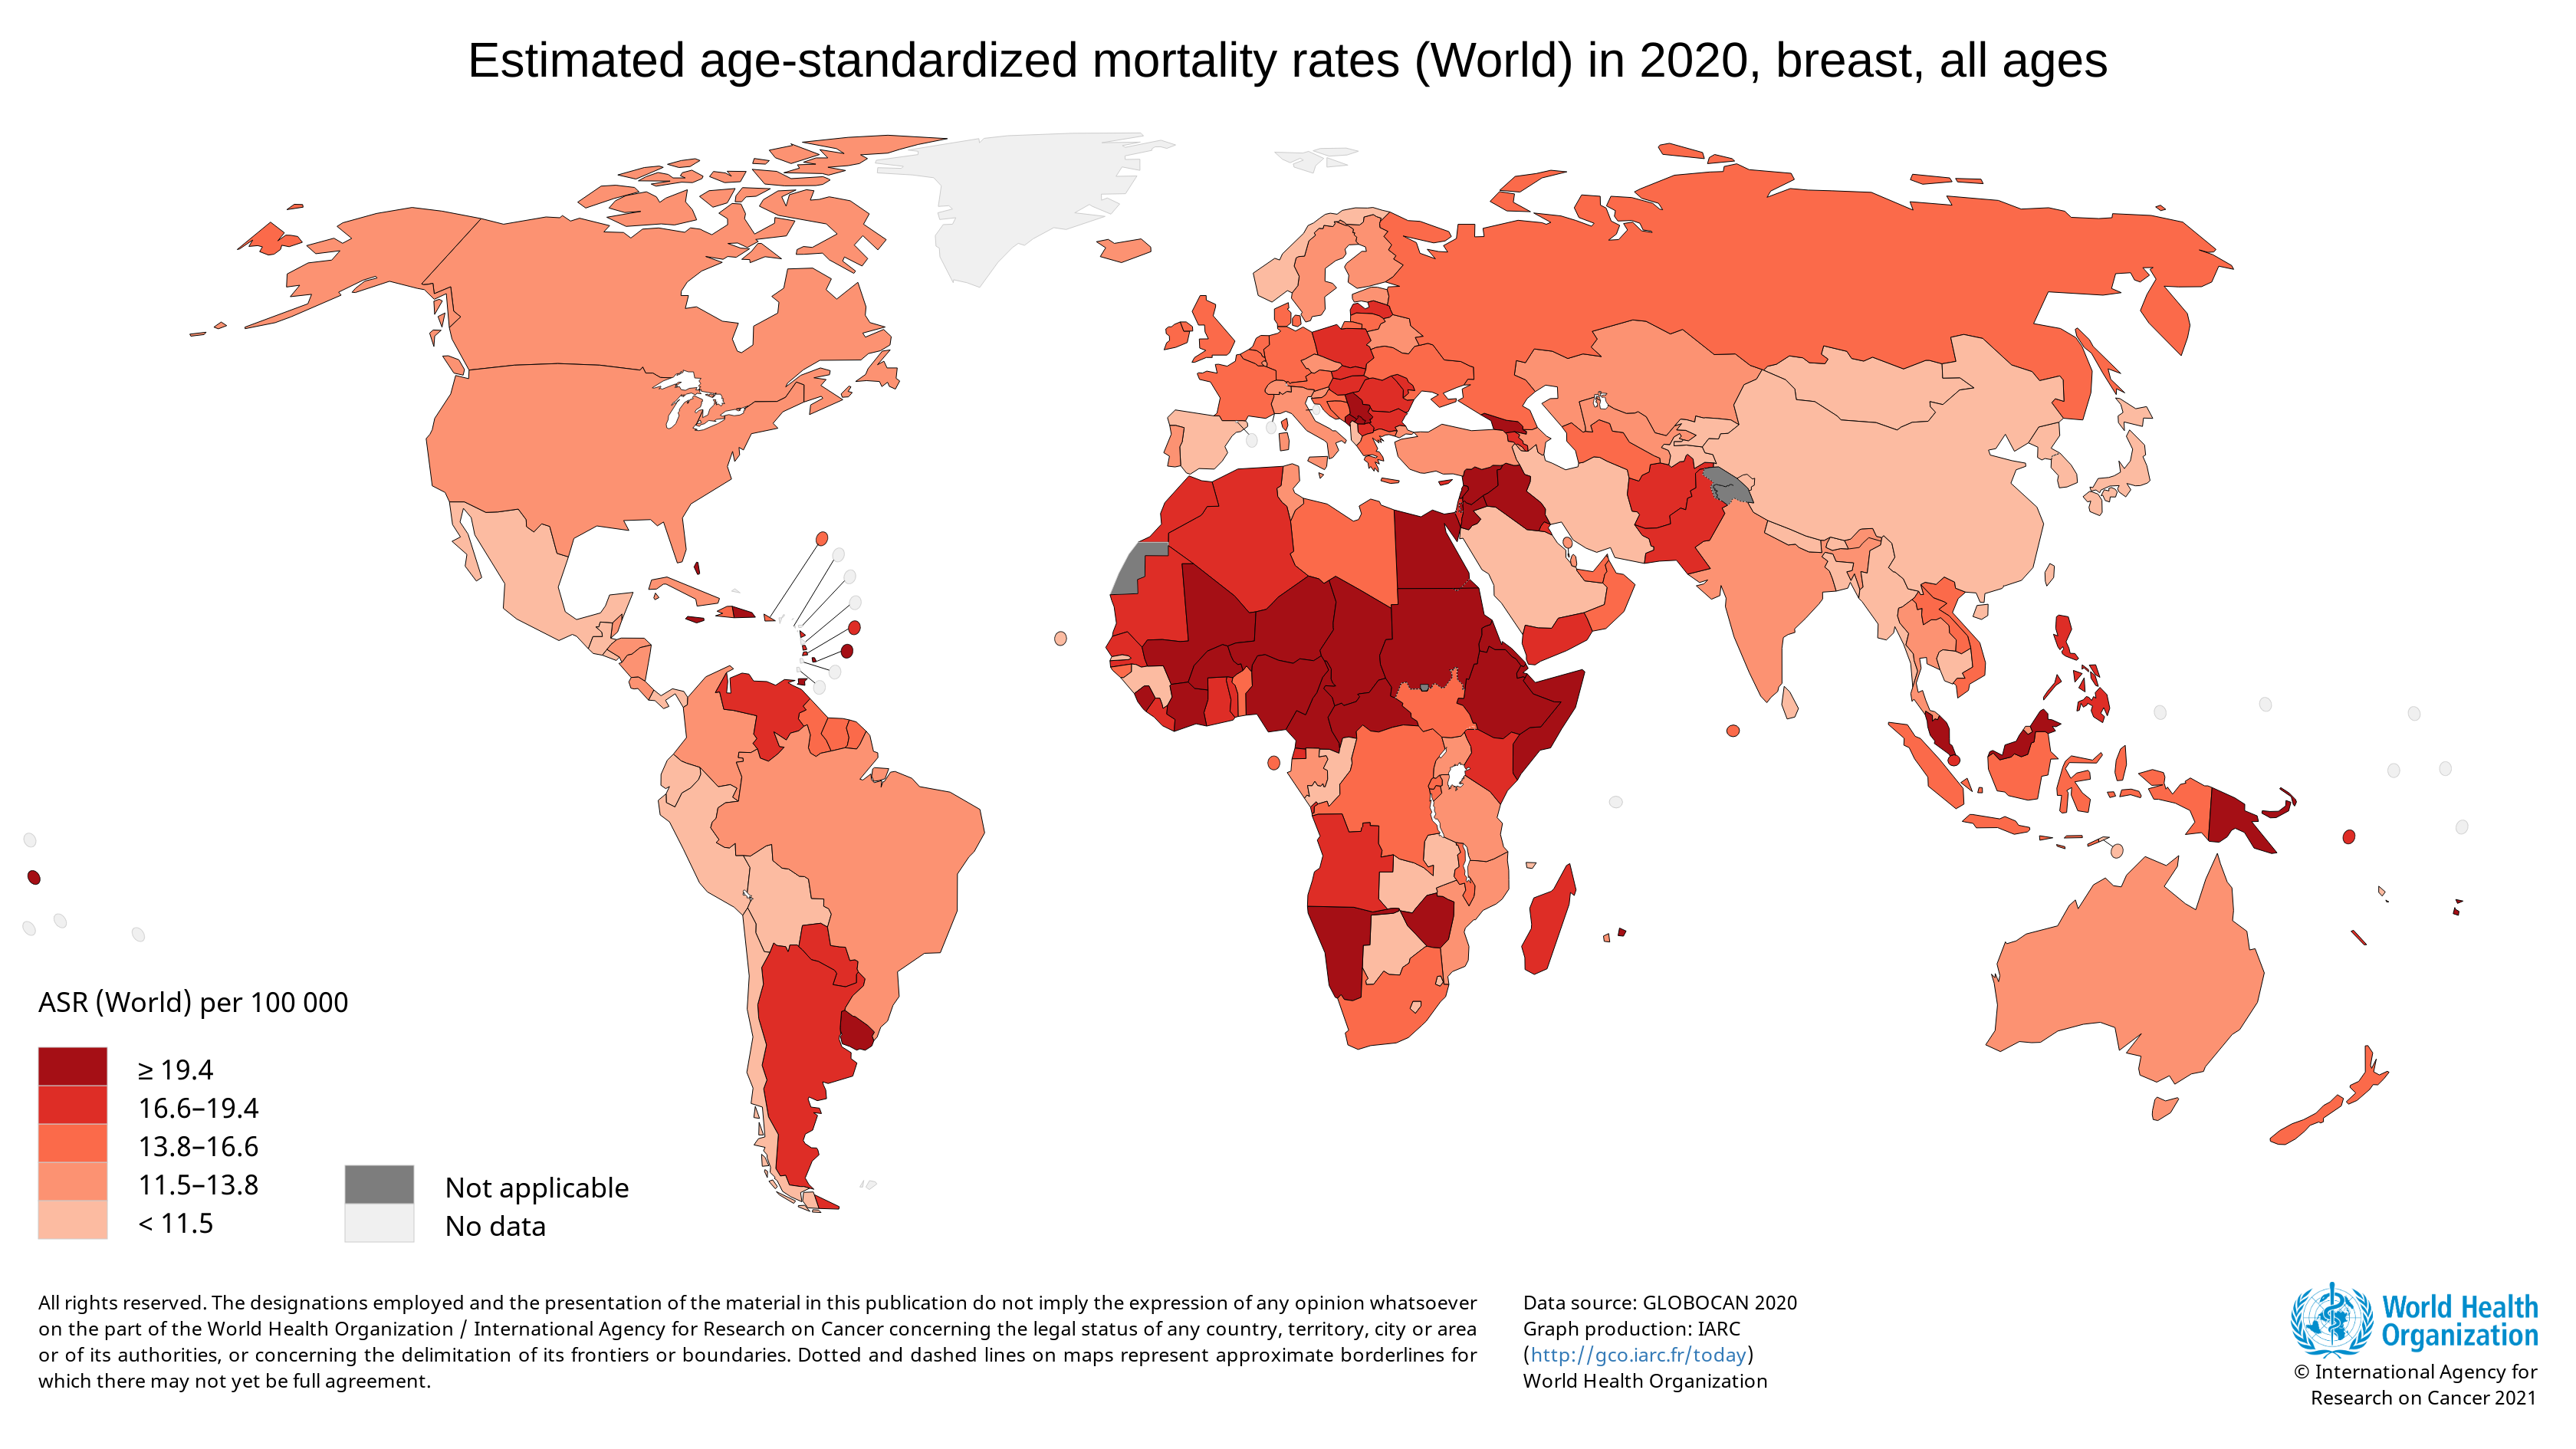 Estimated age-standardized mortality rates (World) in 2020, breast, females, all ages